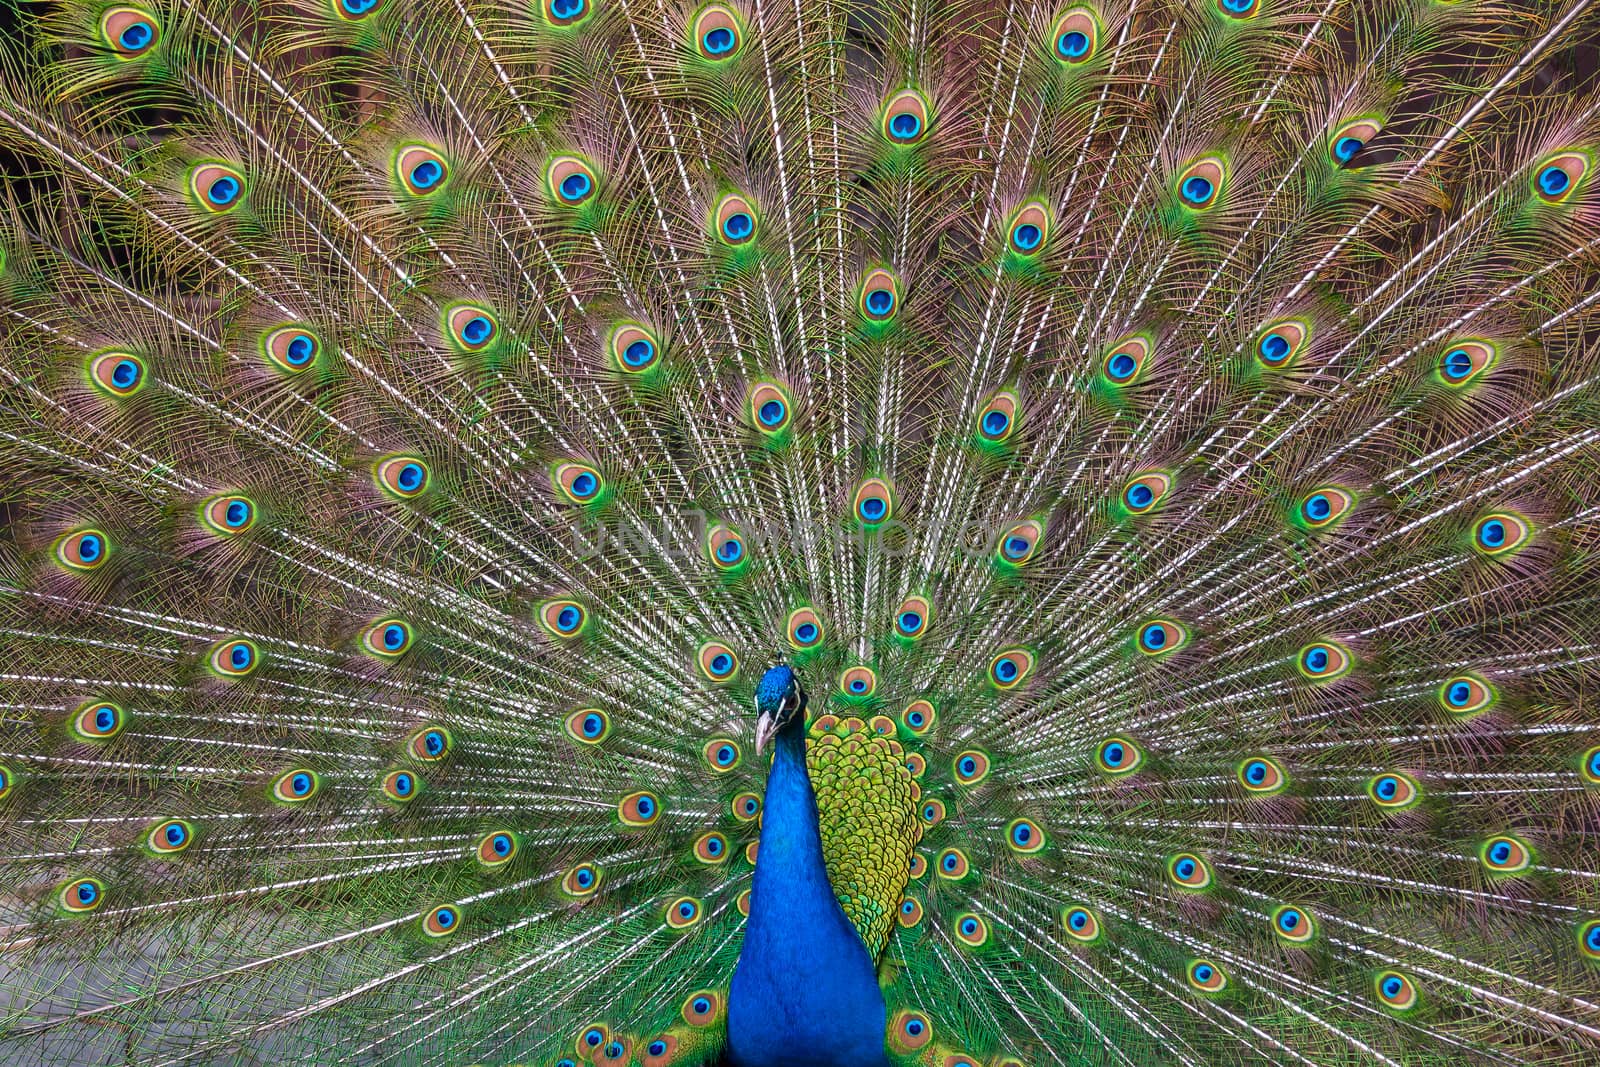 The Peacock with a beautiful multicolored feathers